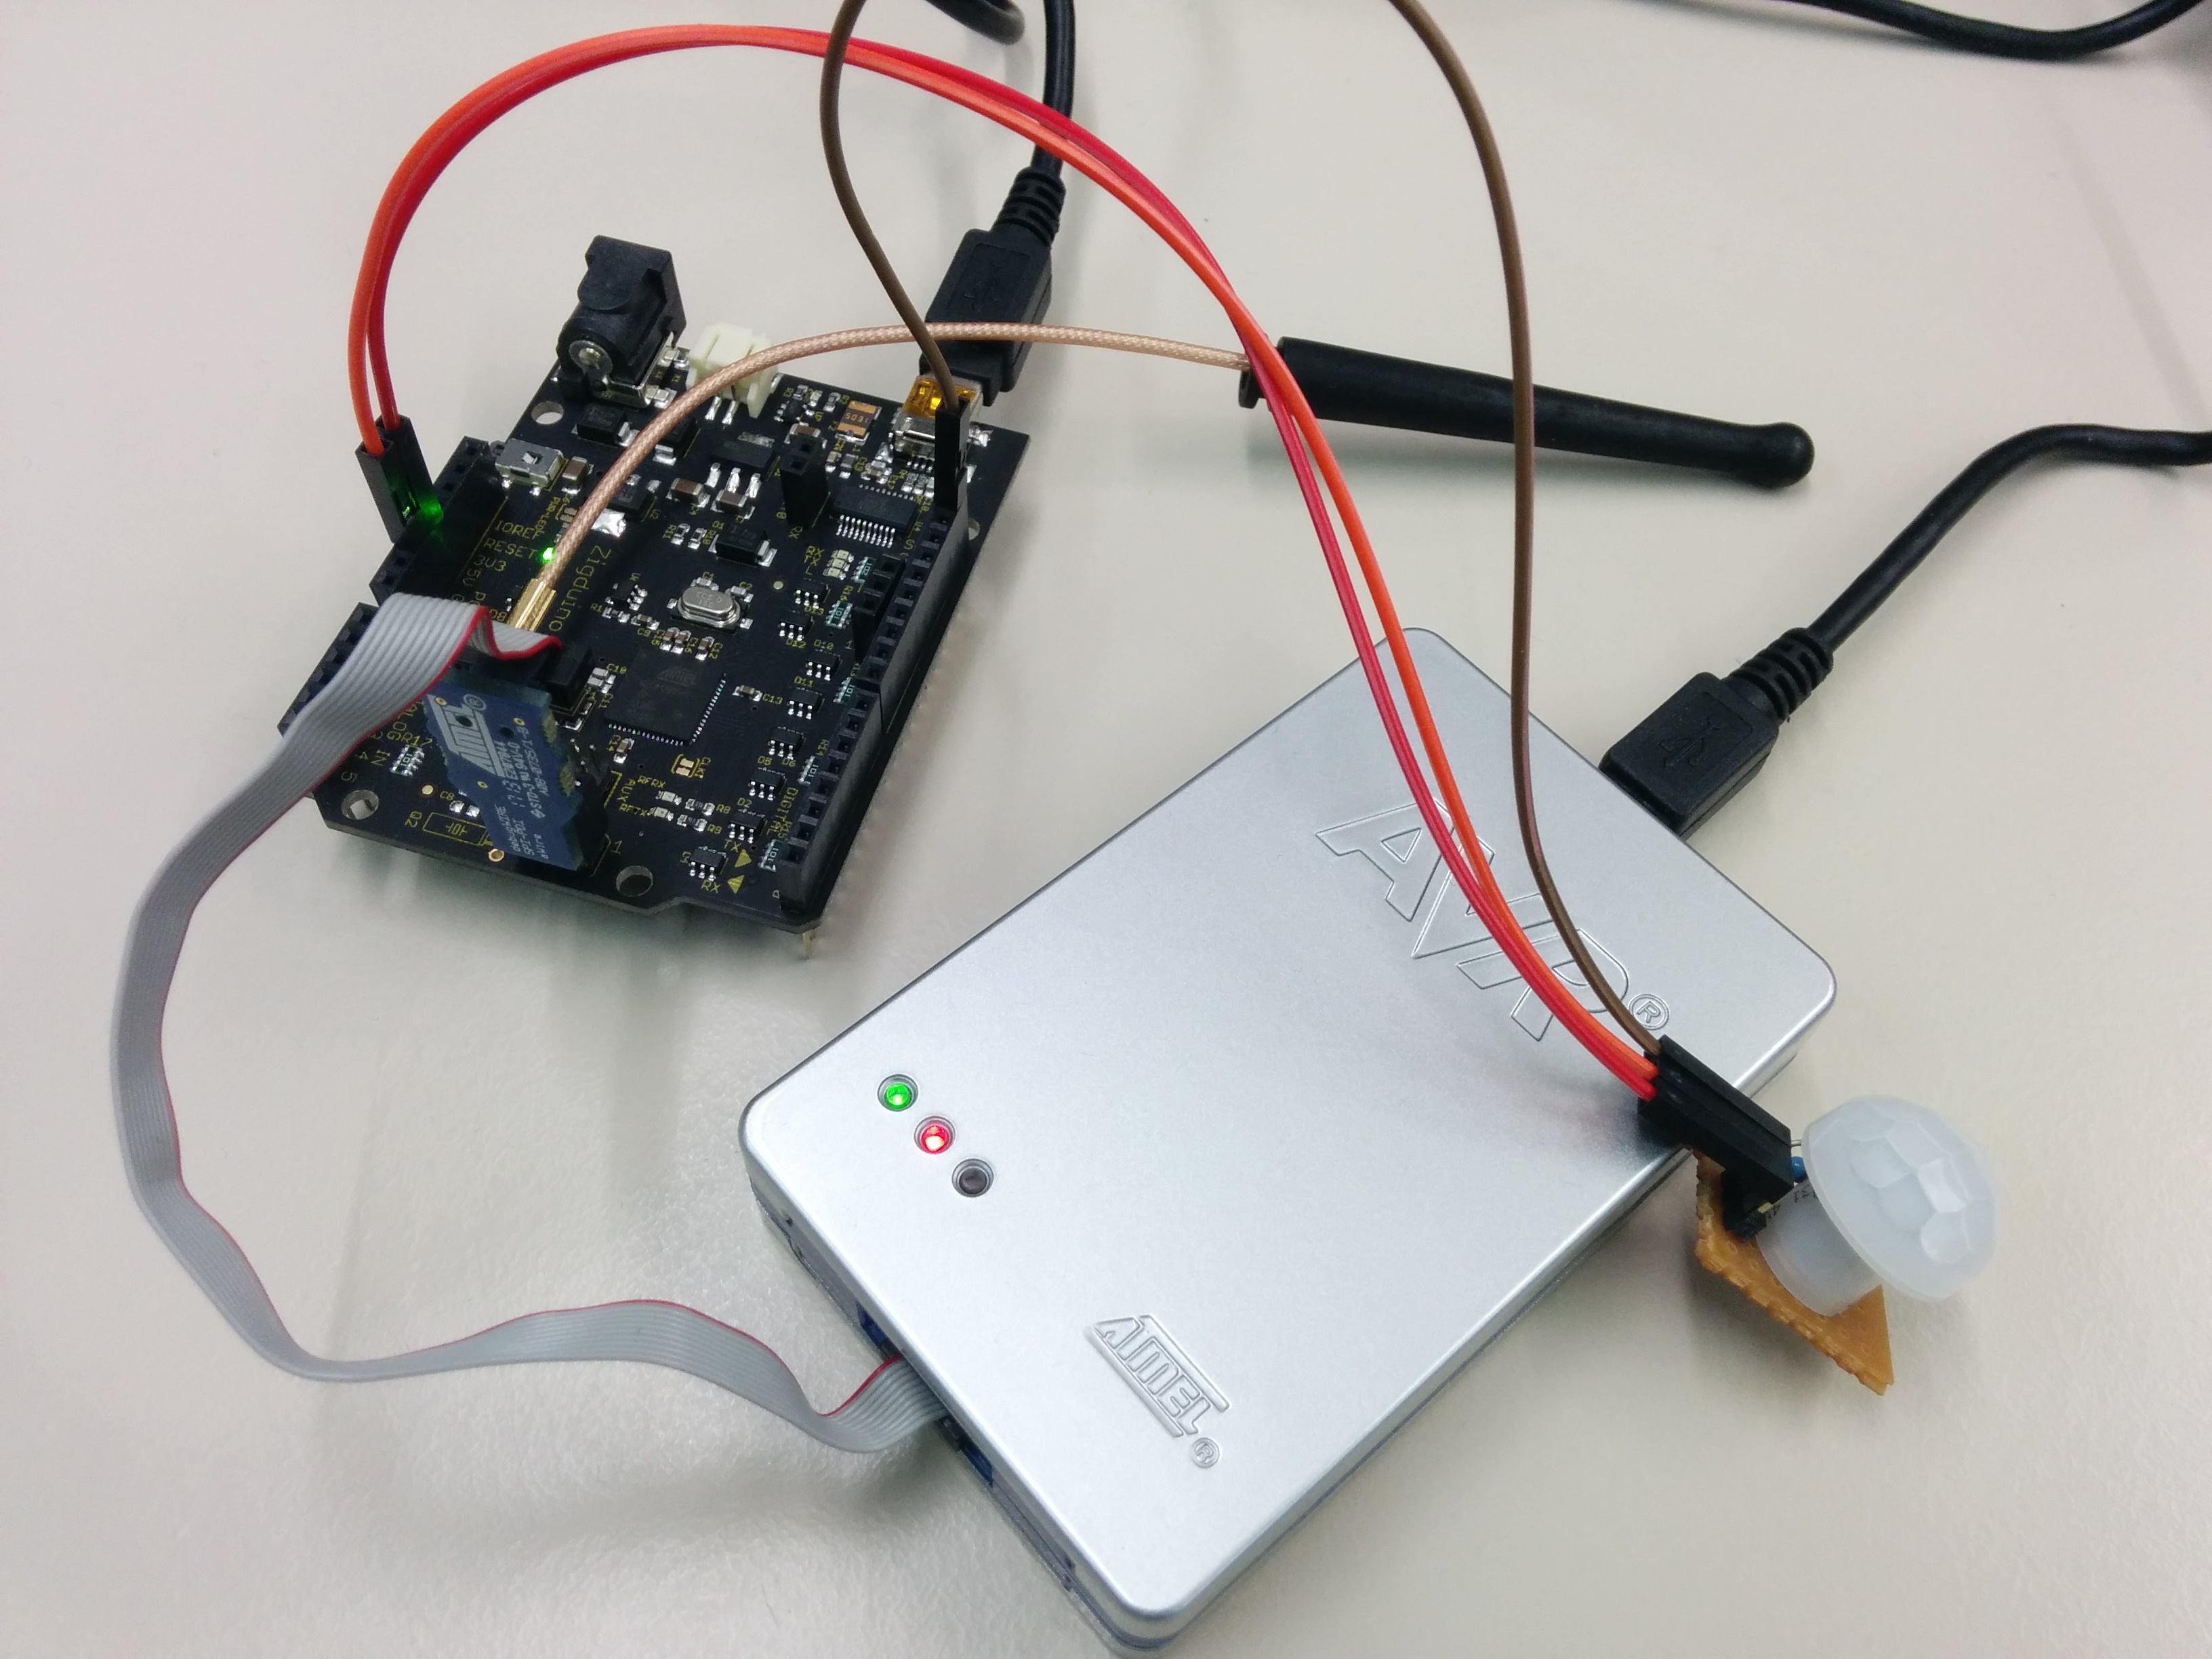 PIR connected to the Zigduino